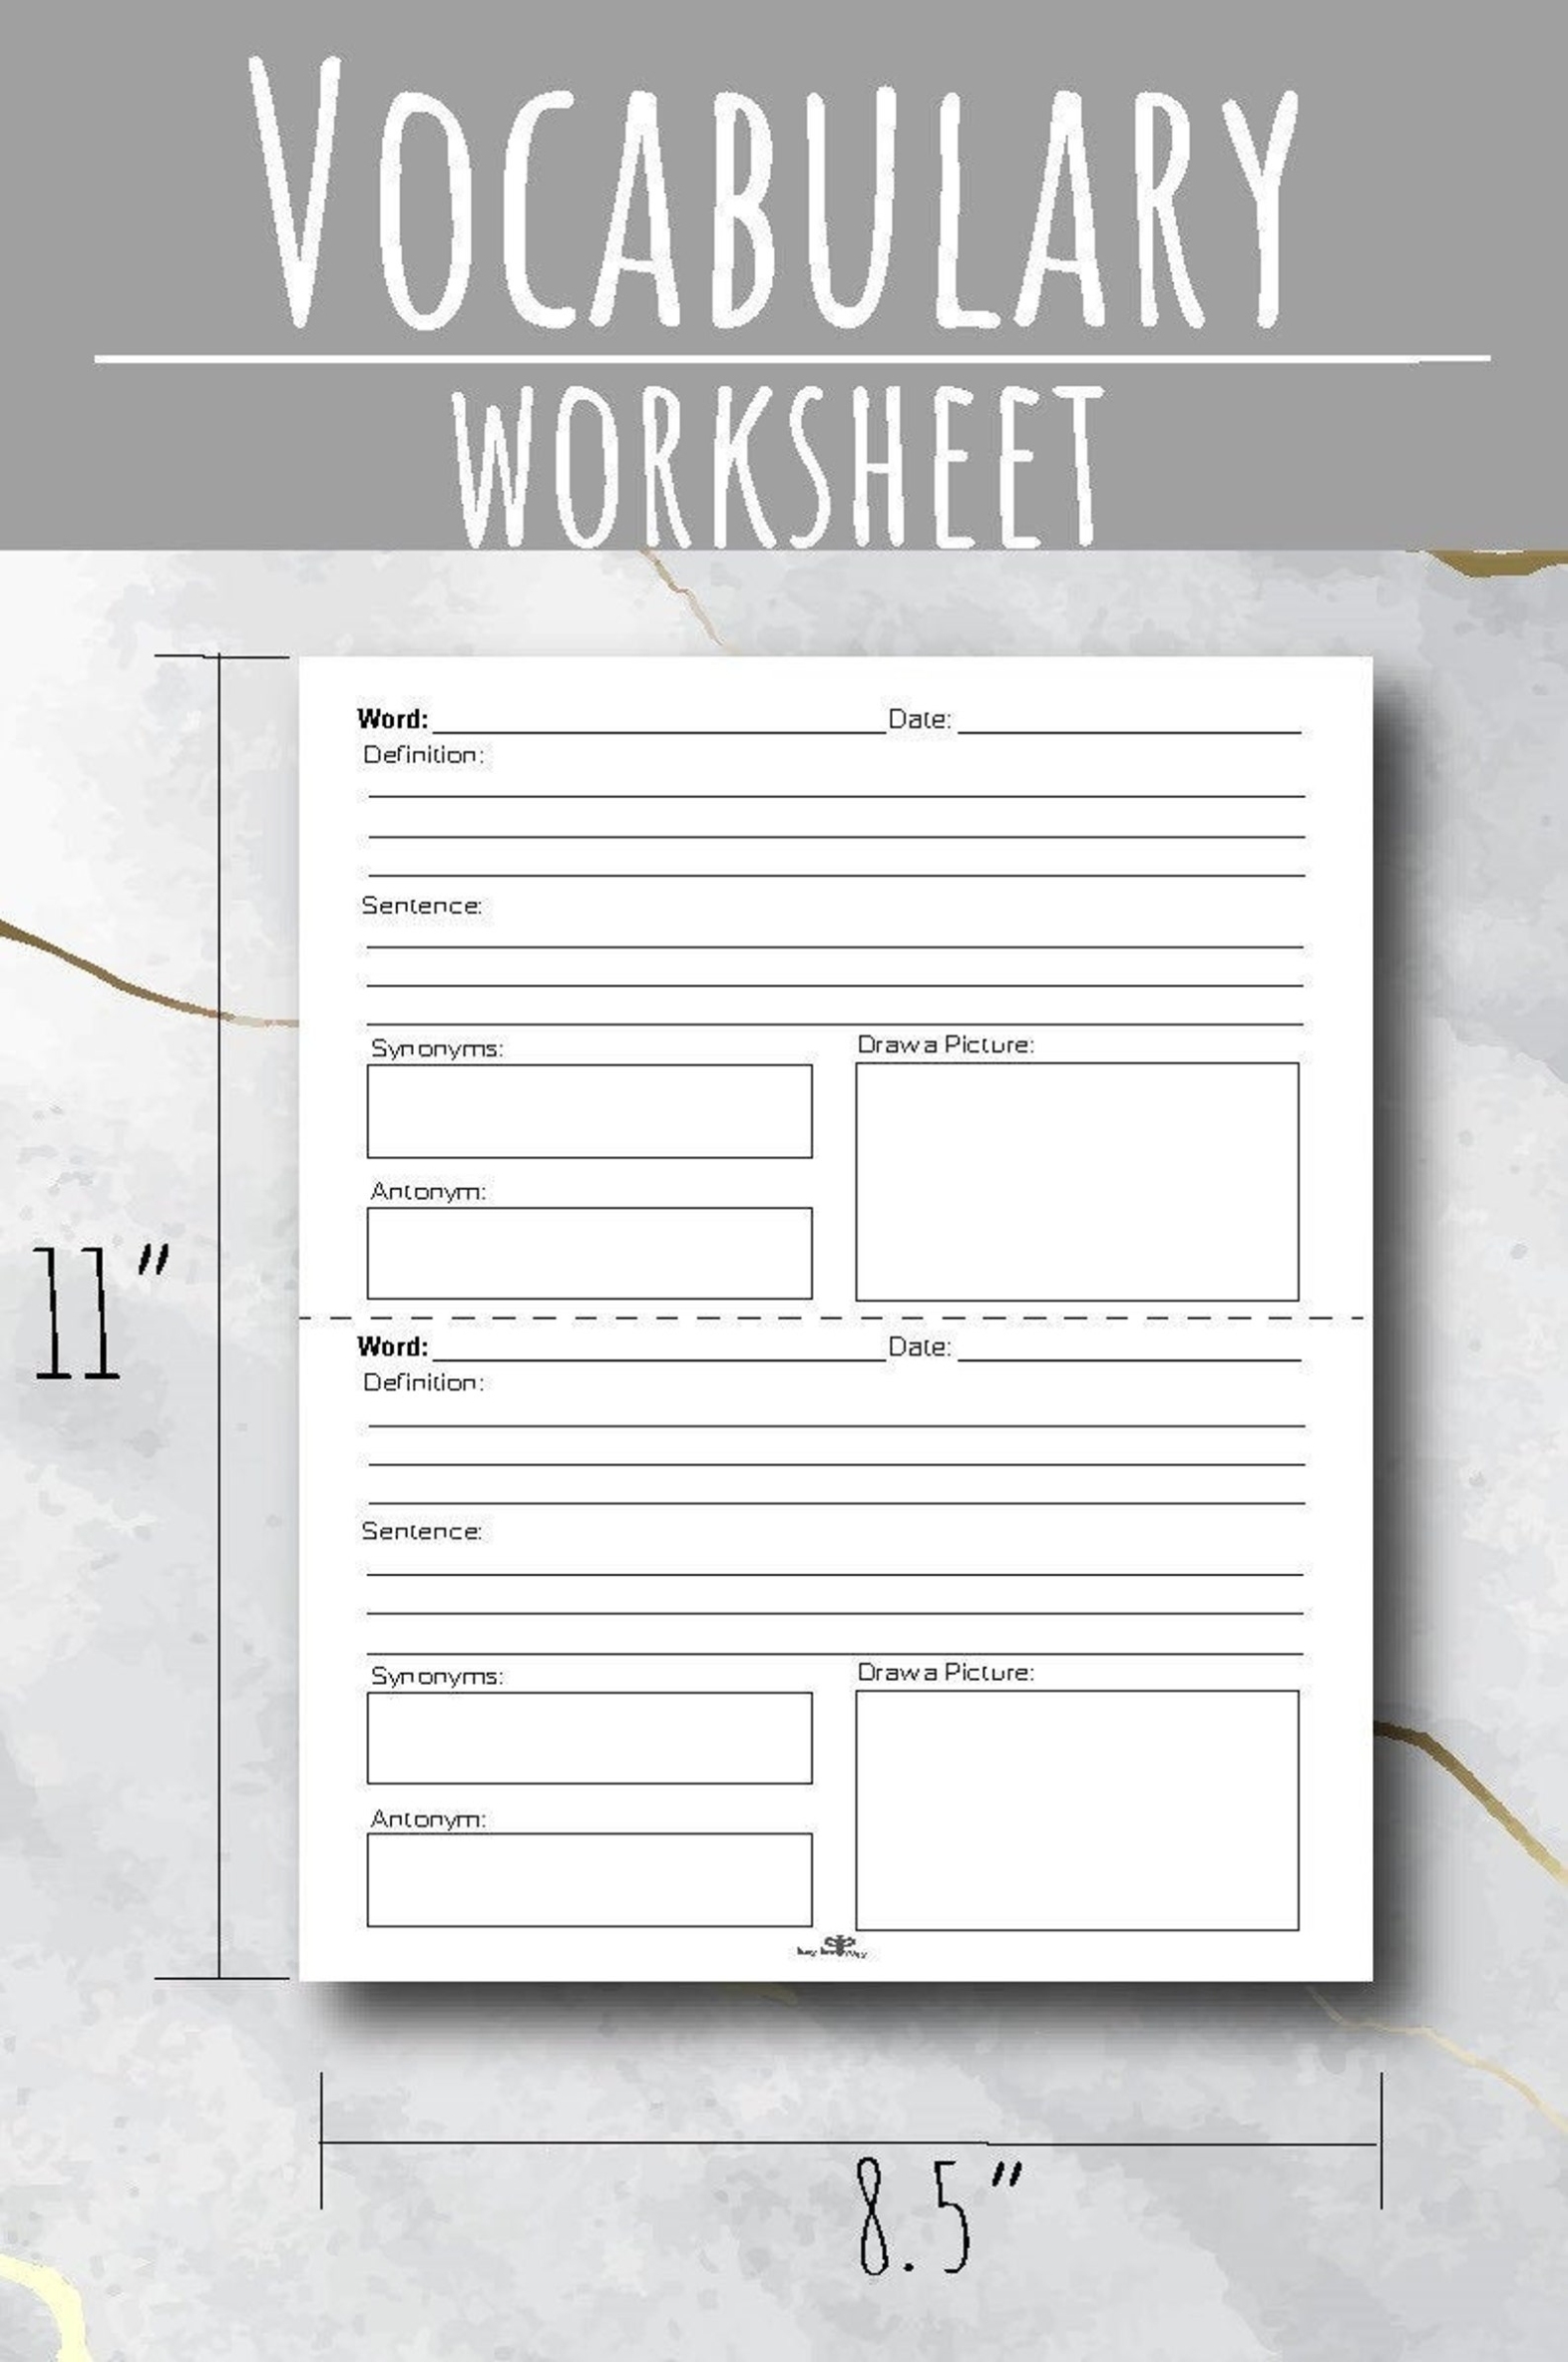 Vocabulary Worksheet Template For Students Printable Instant | Etsy for Vocabulary Words Worksheet Template